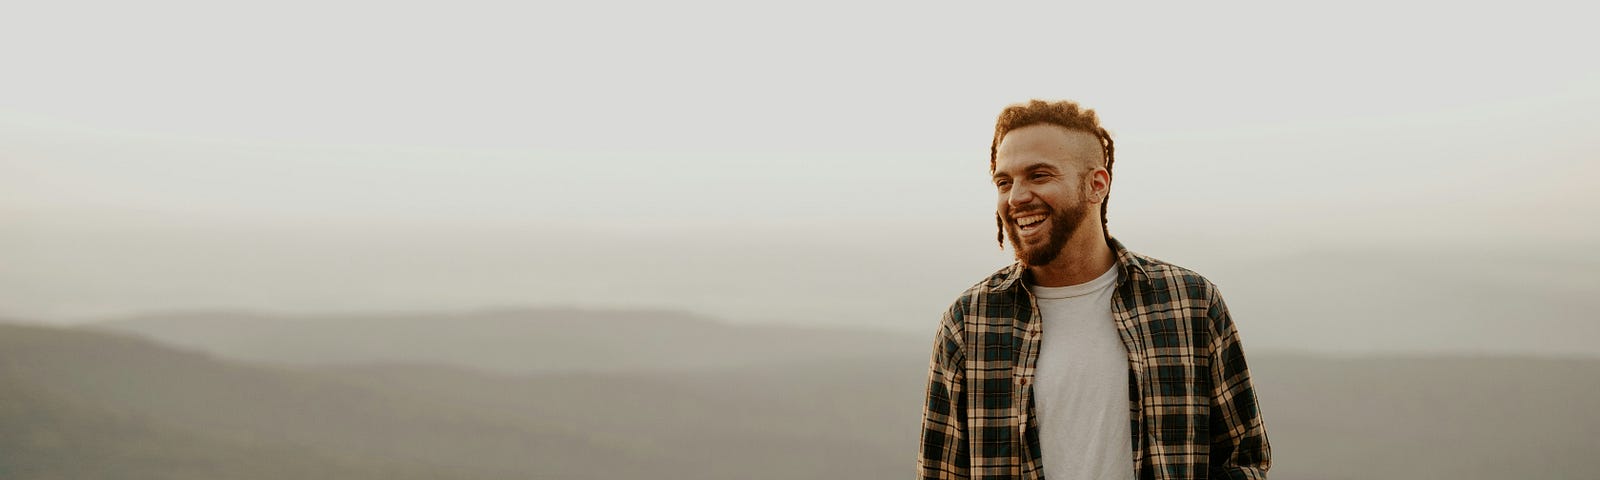 Picture showing a man happy on the cliff of a mountain.